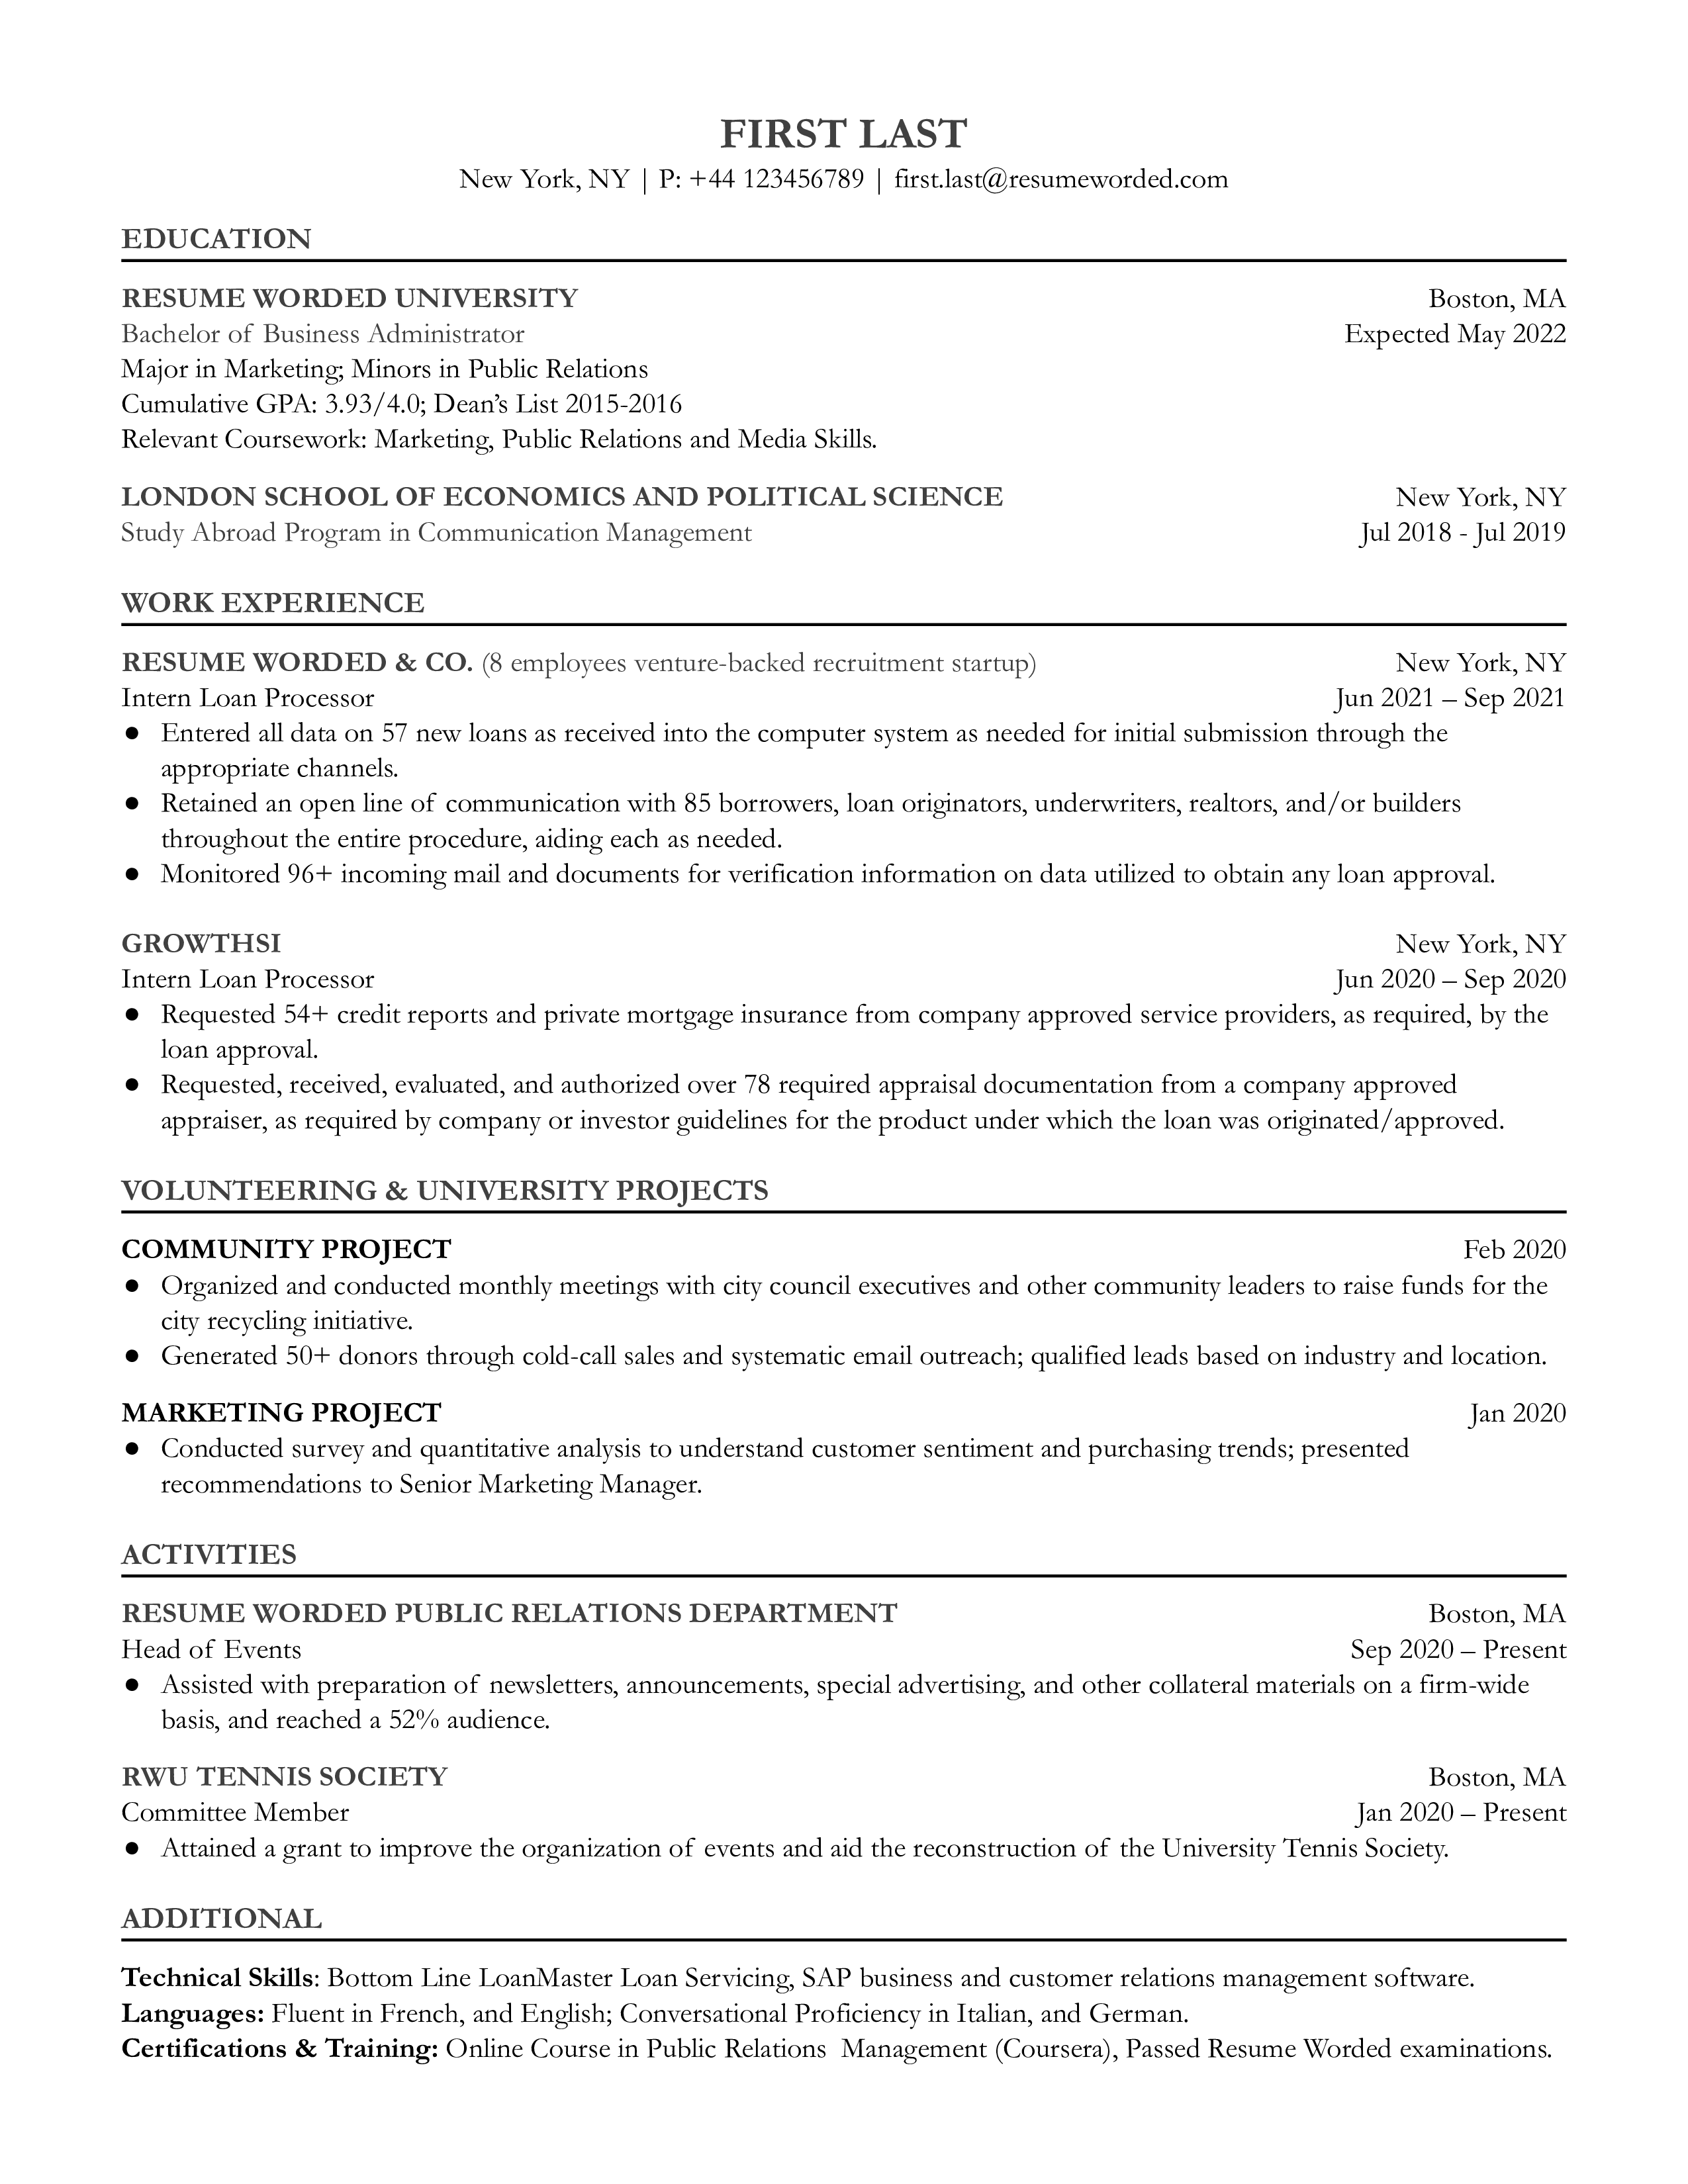 An entry-level loan processor resume sample that highlights the applicant’s relevant school experience and internships.